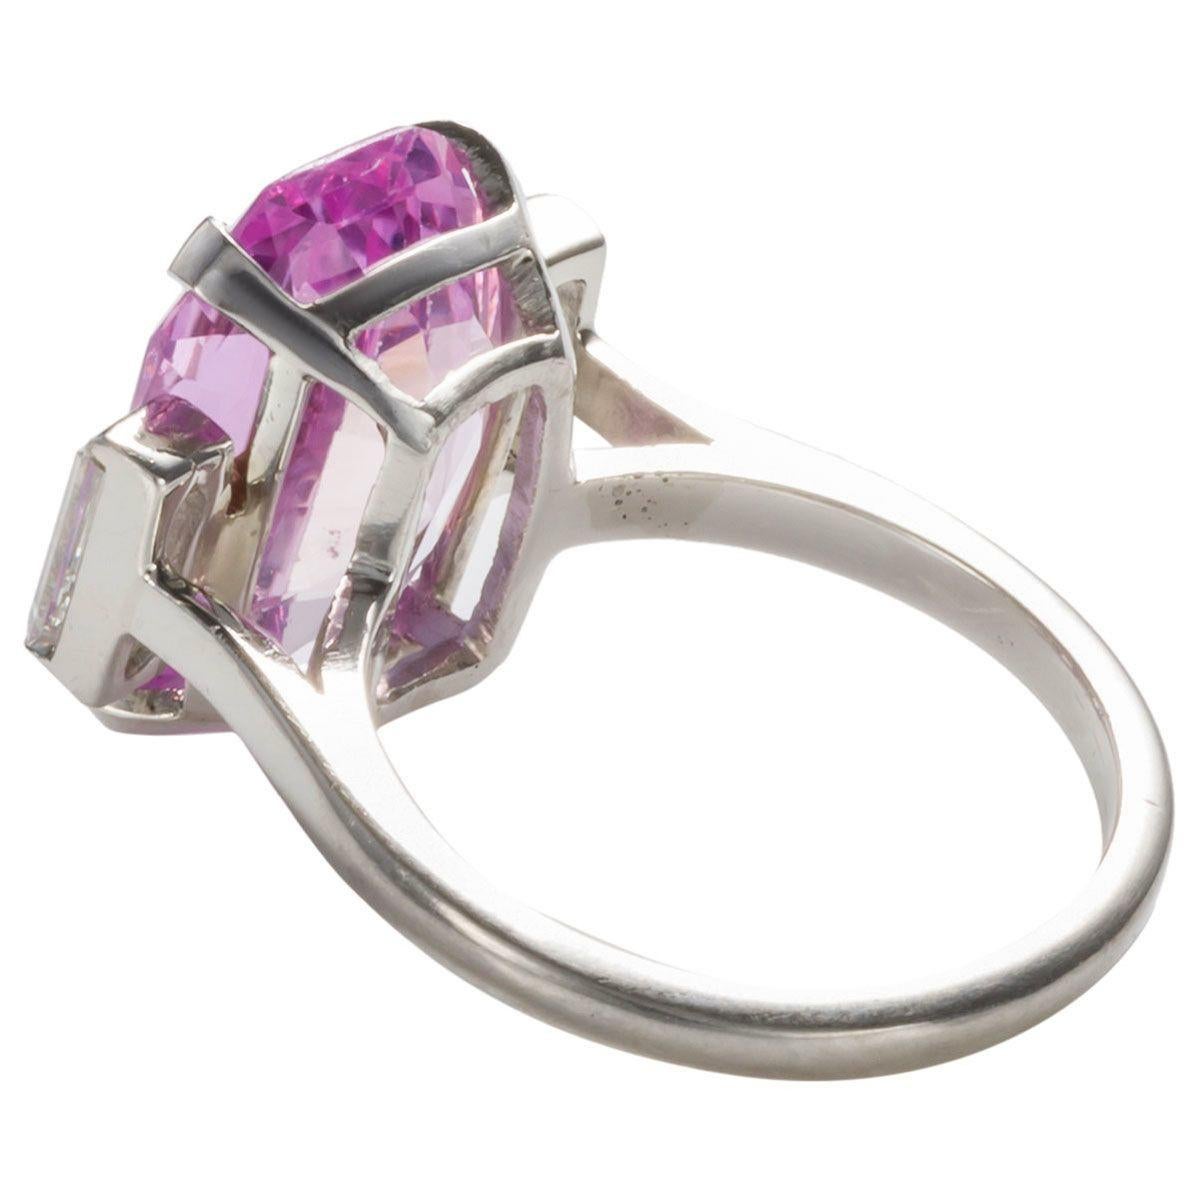 Women's 8.27 Carat Unheated Certified Pink Ceylon Sapphire and Baguette Cut Diamond Ring For Sale